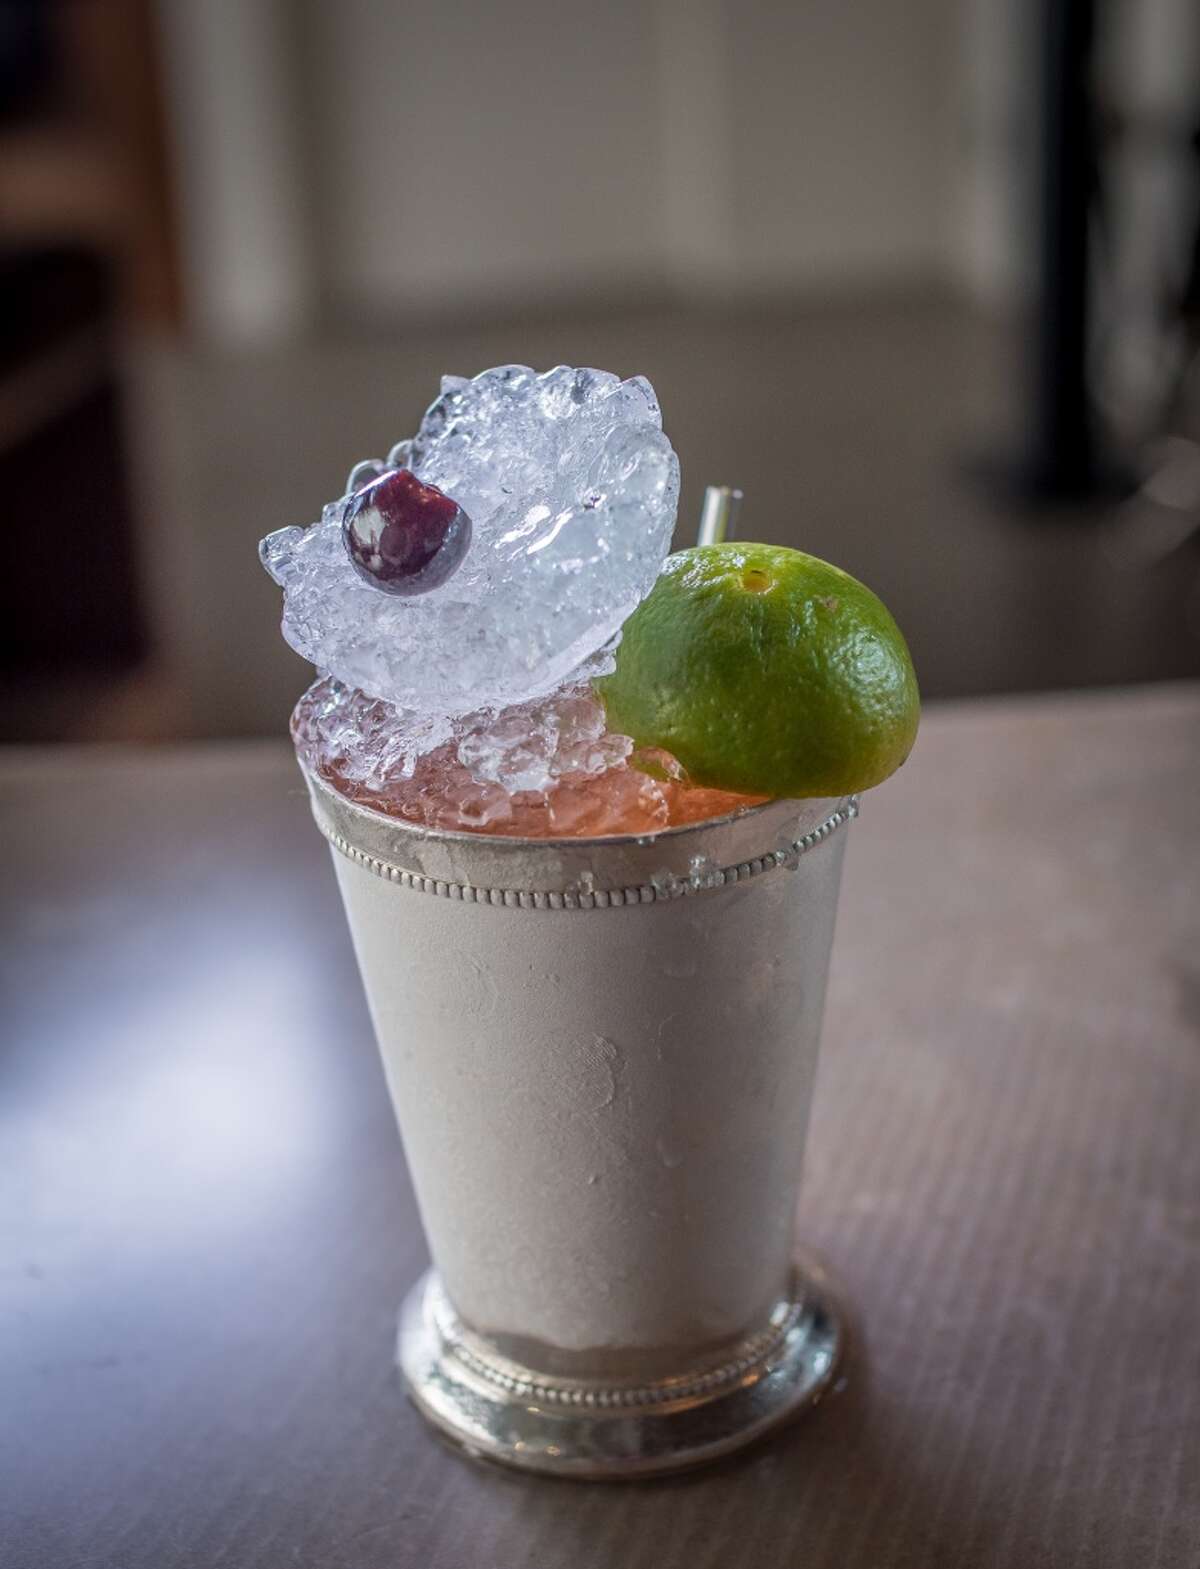 The "Death in the Gulf Stream" cocktail at Interval in San Francisco, Calif., is seen on Monday, July 28th, 2014.